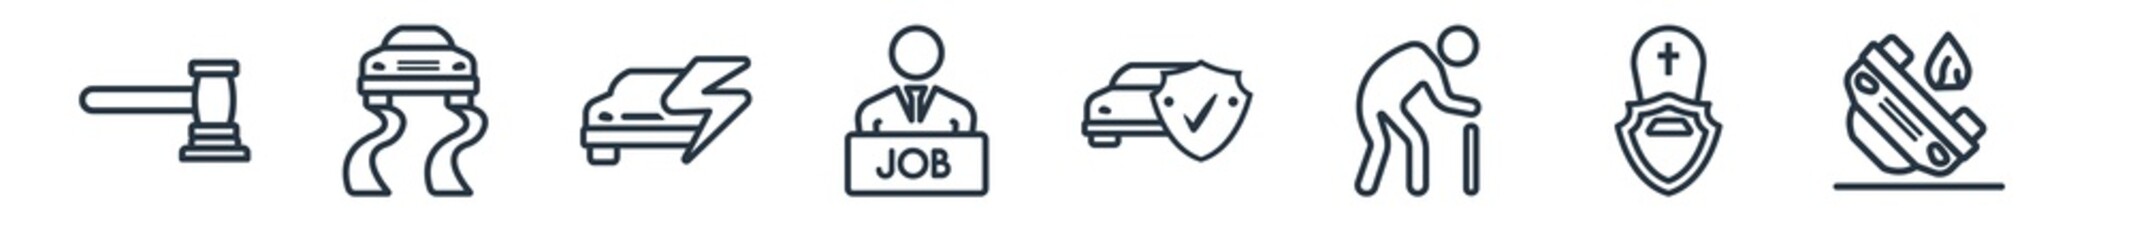 linear set of insurance outline icons. line vector icons such as legal expenses, slippery road, problem electric, unemployed, repair, accident vector illustration.